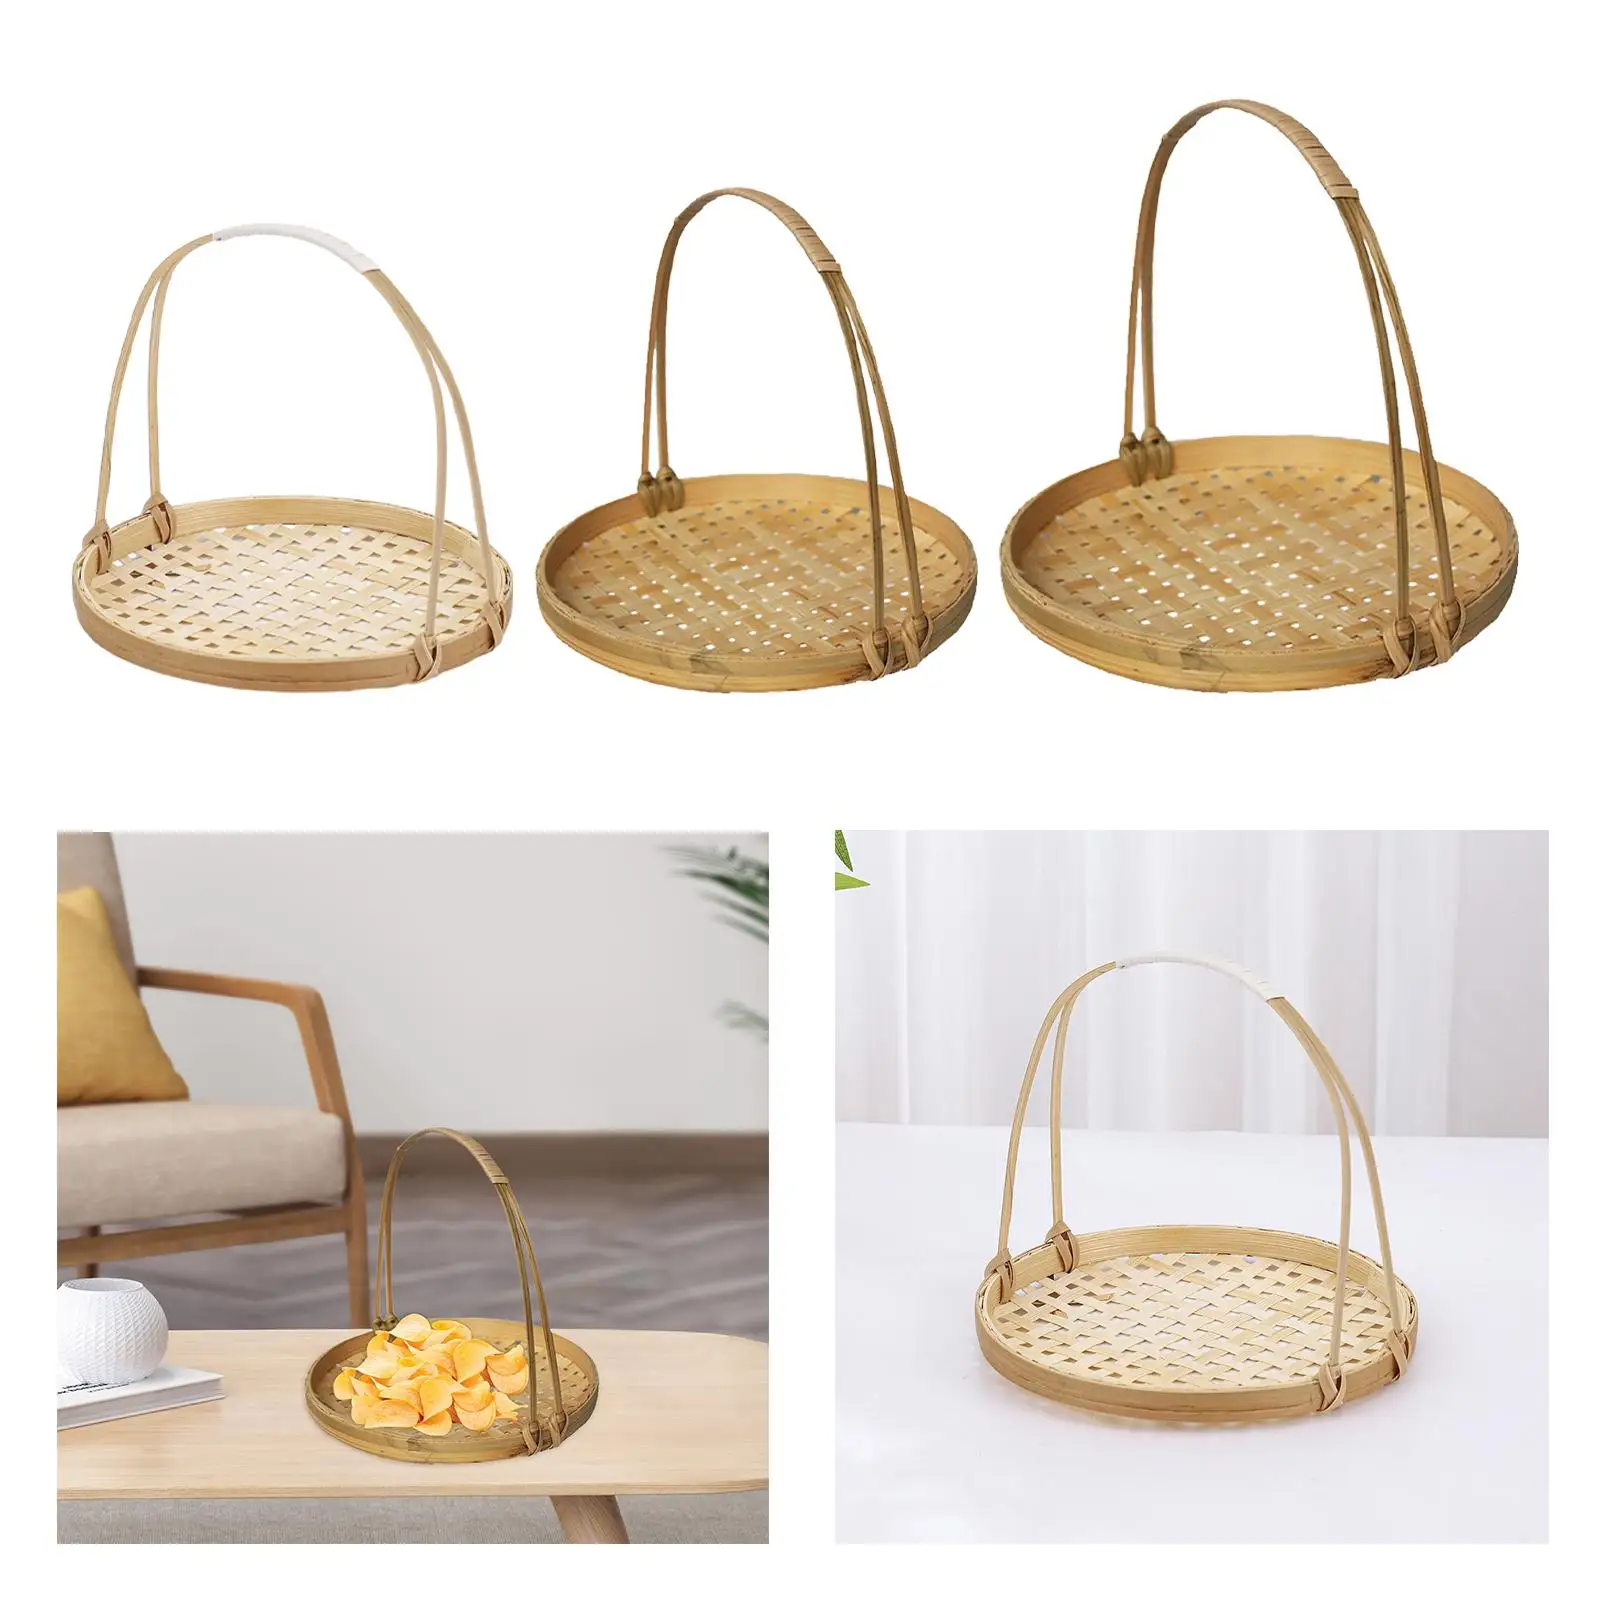 Hand Woven Fruit Basket Rattan Farmhosue Decoration with Handles Ottoman Trays Food Storage for Dining Room Picnics Home Table